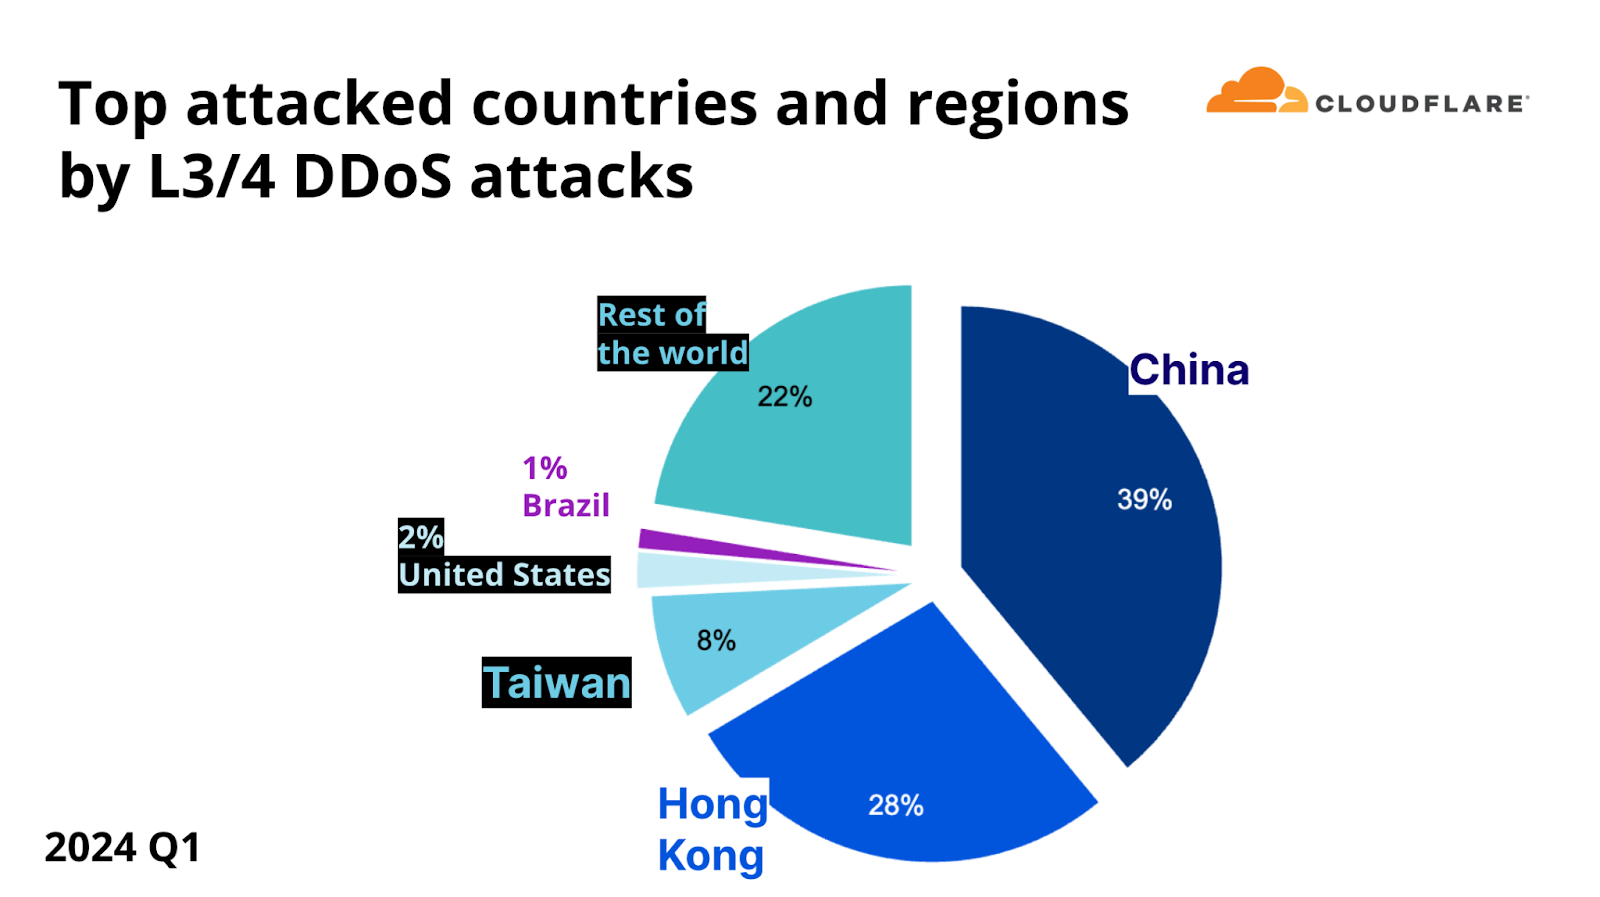 Top attacked countries and regions by L3/4 DDoS attacks